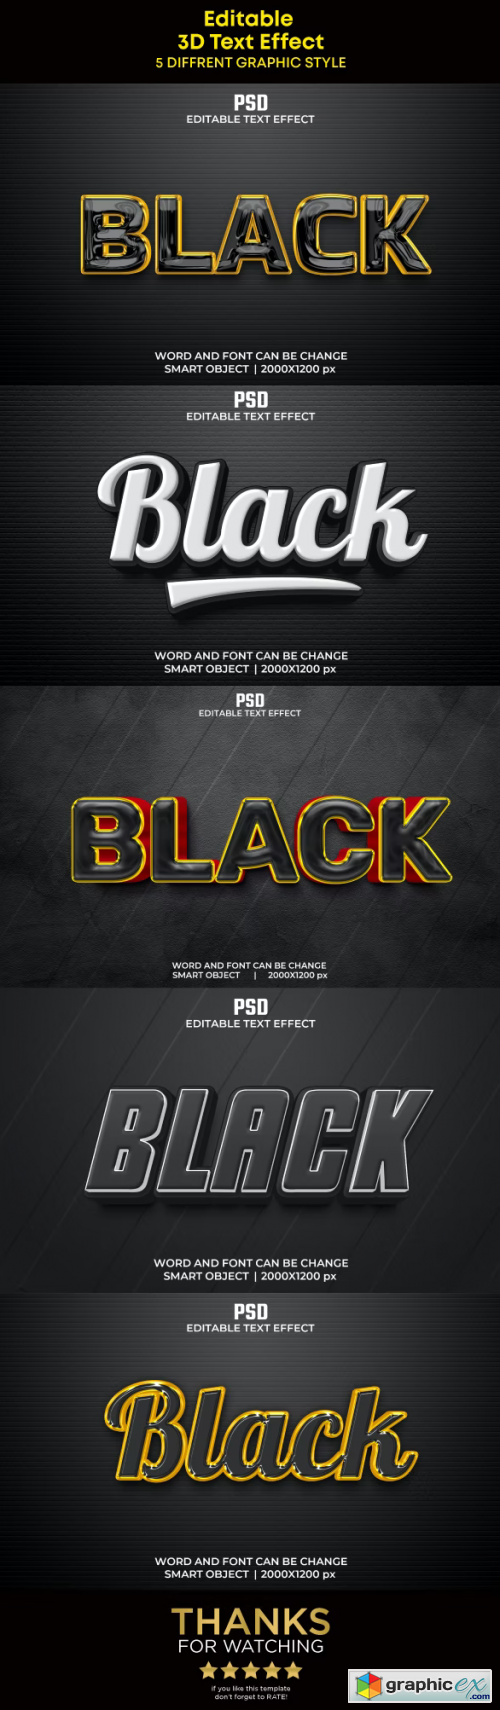 5 Black 3D Editable Text Effects Pack